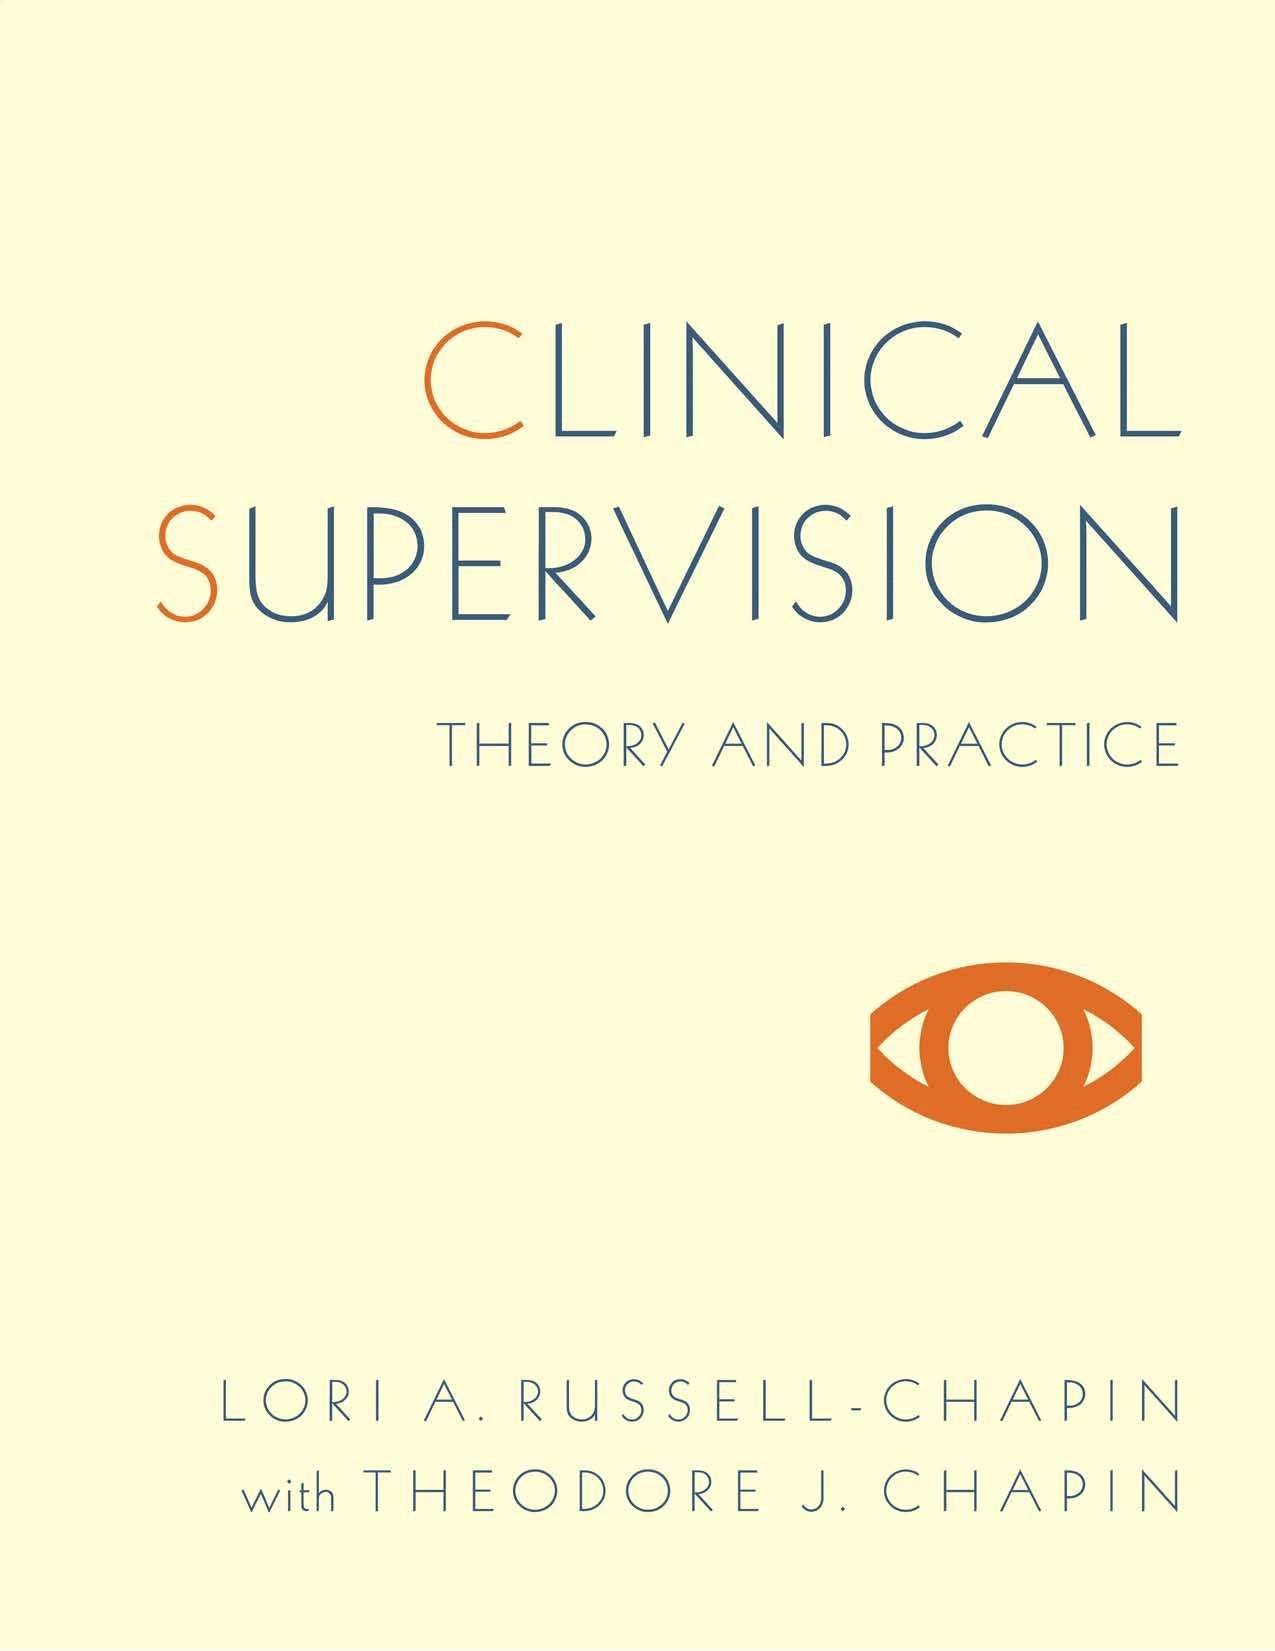 Clinical Supervision: Theory and Practice